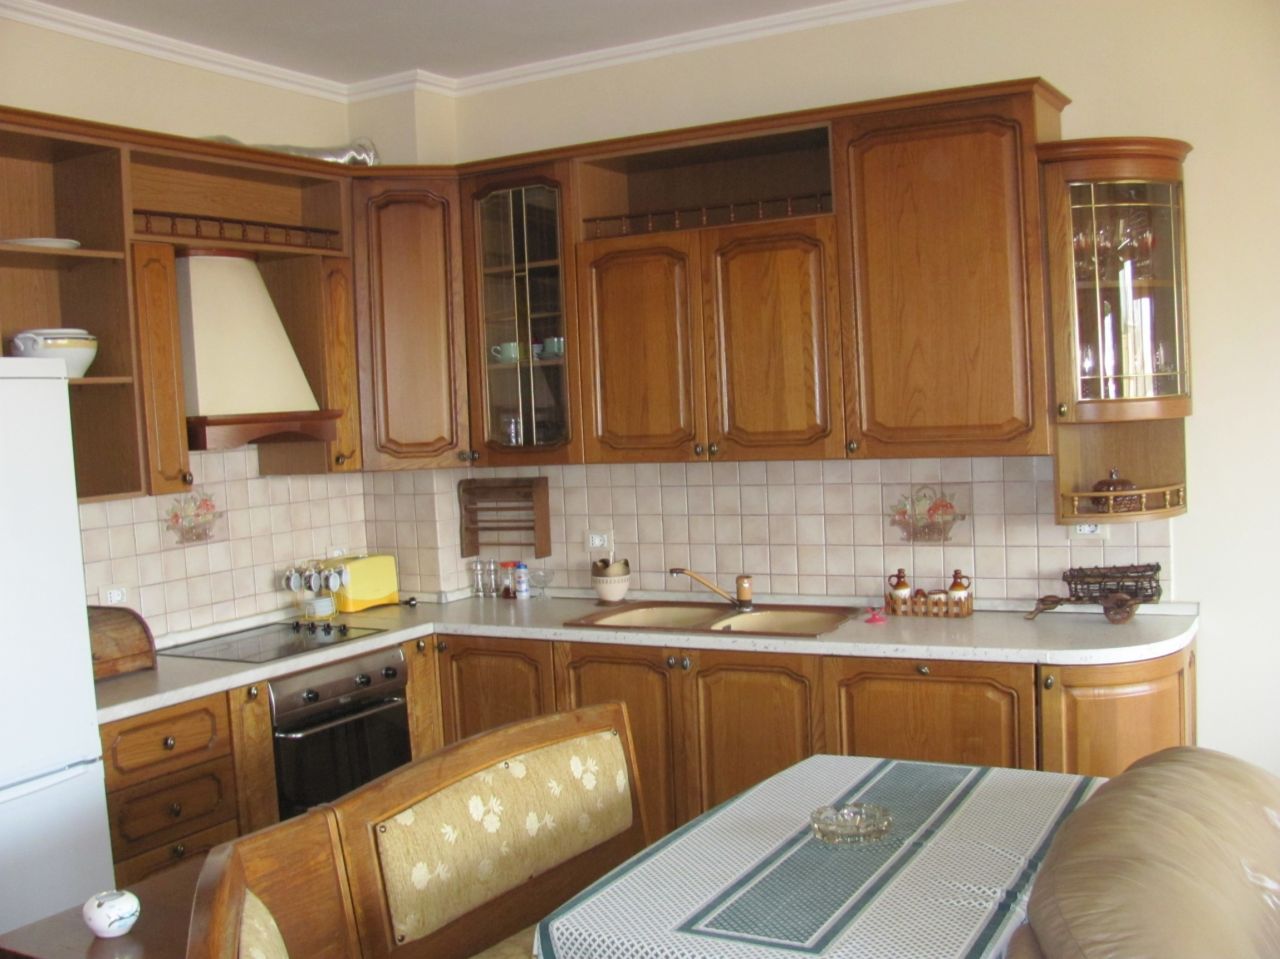 Nicely located apartment for rent in the capital of Albania, Tirana.